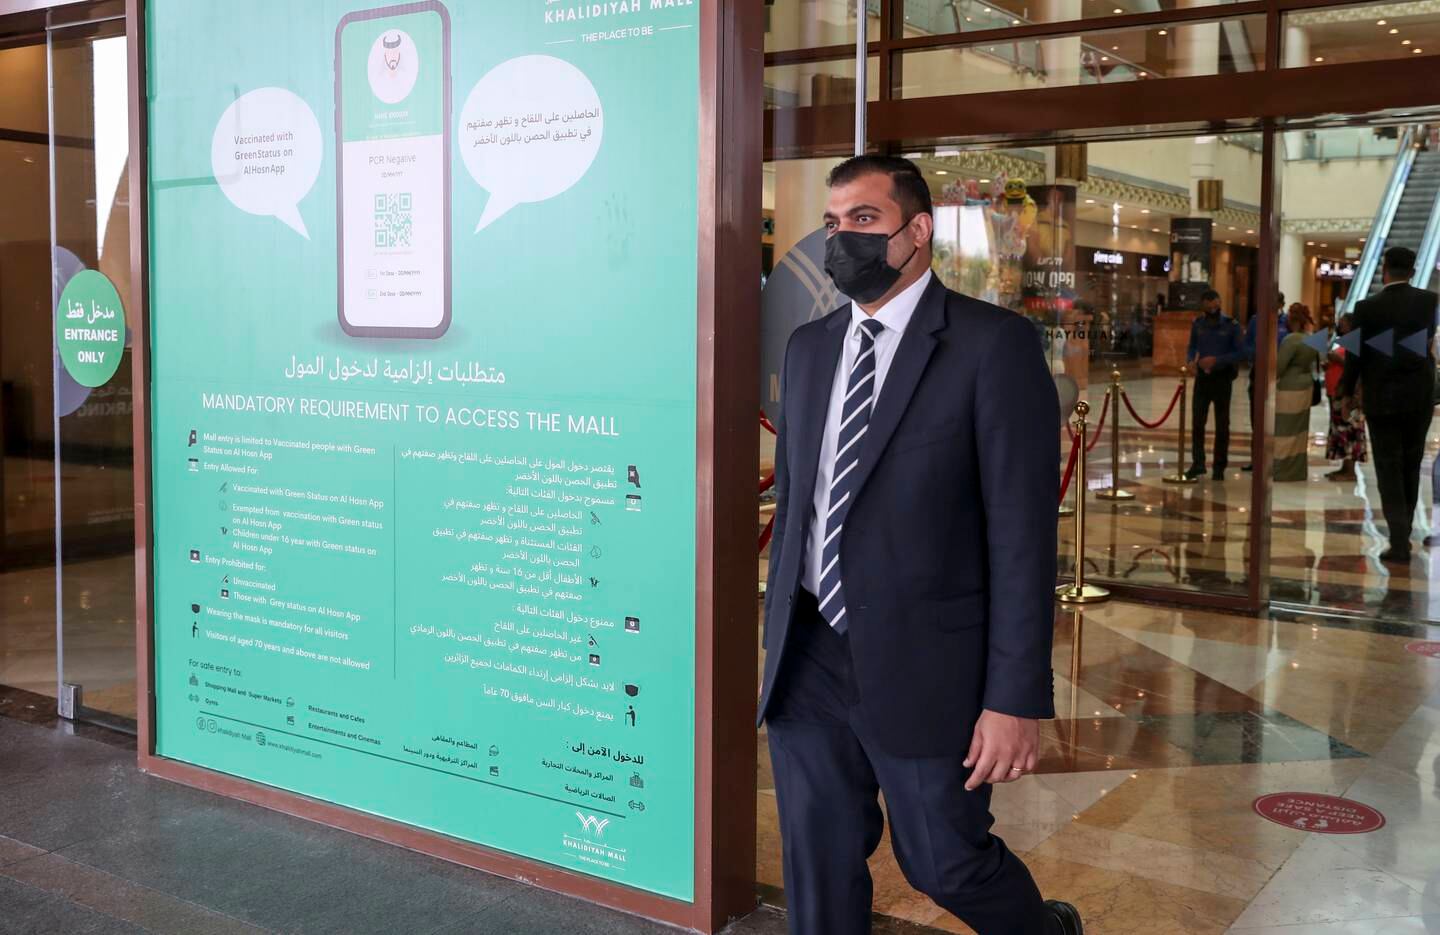 A sign outside Khalidiyah Mall in Abu Dhabi stipulating people must show proof of vaccination to enter. Khushnum Bhandari / The National 